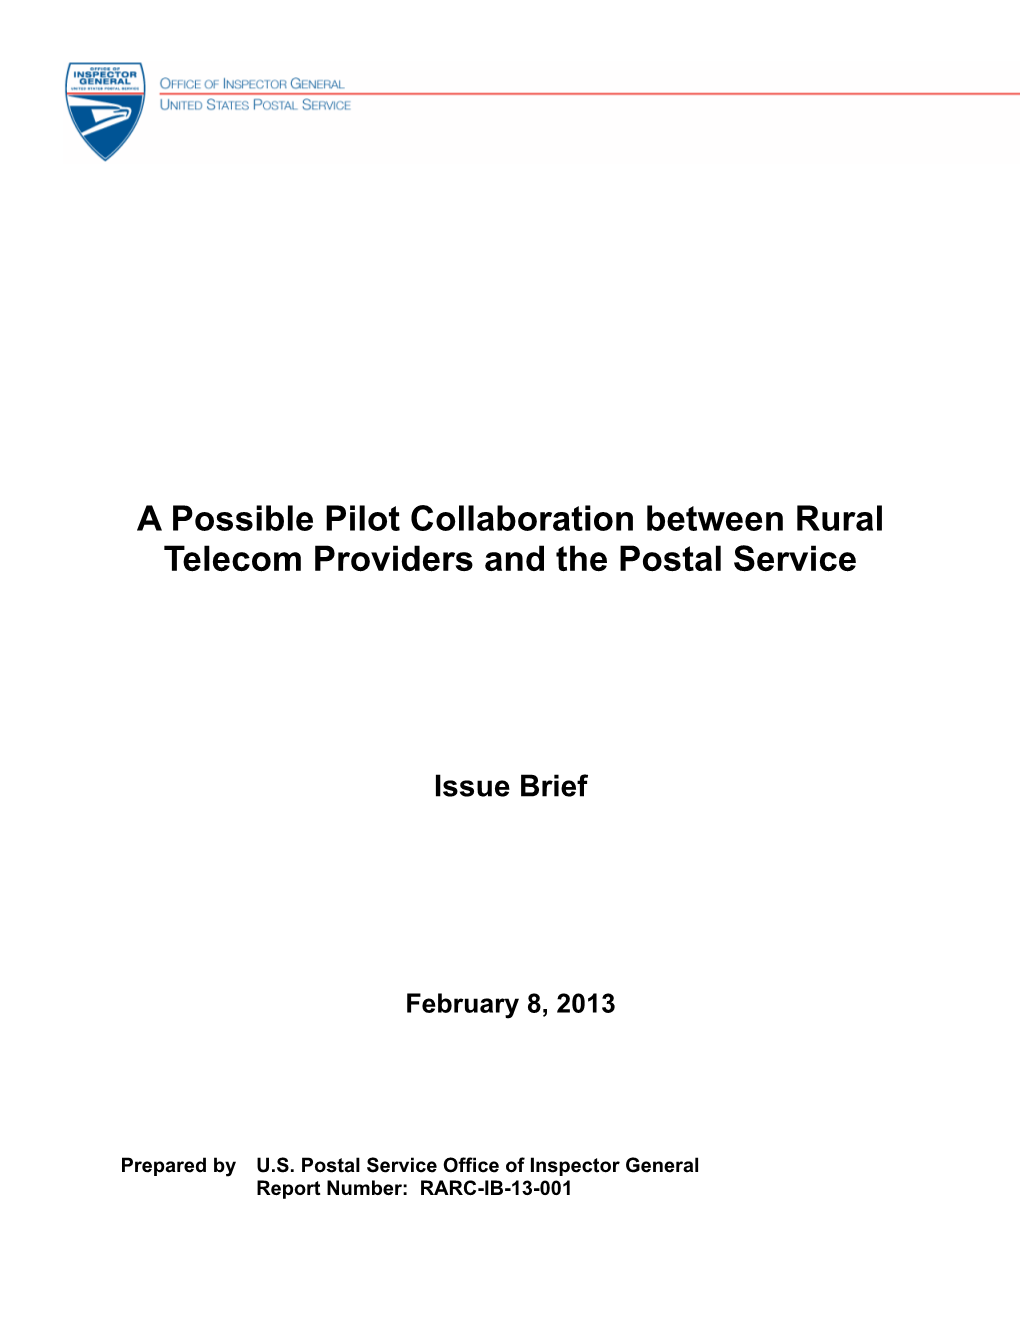 A Possible Pilot Collaboration Between Rural Telecom Providers and the Postal Service